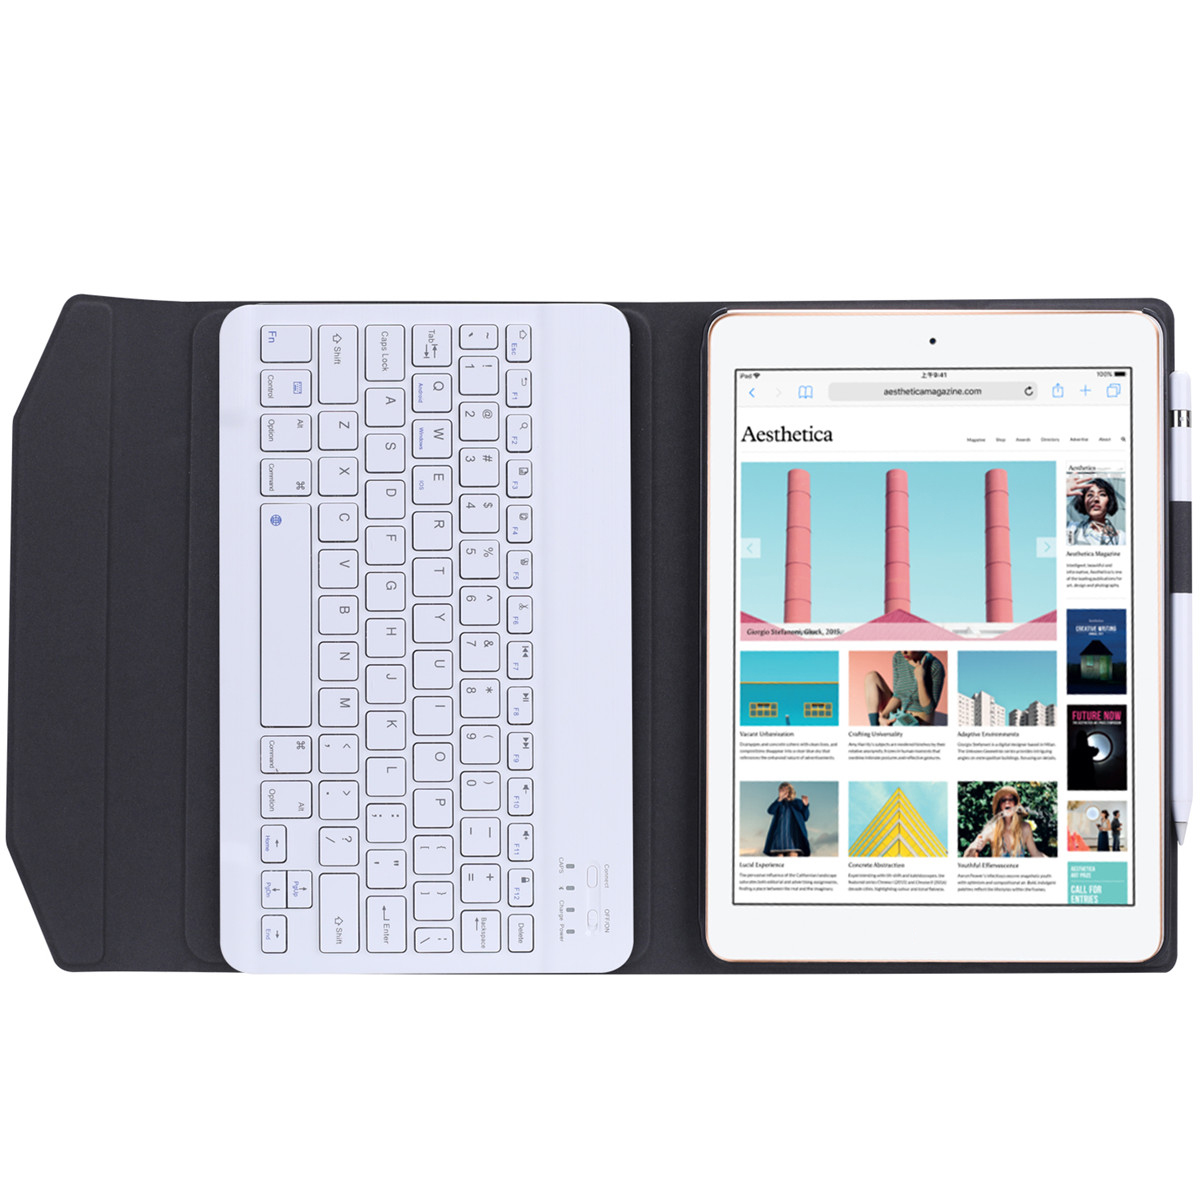 2-in-1-Wireless-bluetooth-Keyboard-Wear-Resistant-PU-Leather-Flip-Foldable-Full-Cover-Protective-Cas-1784740-9